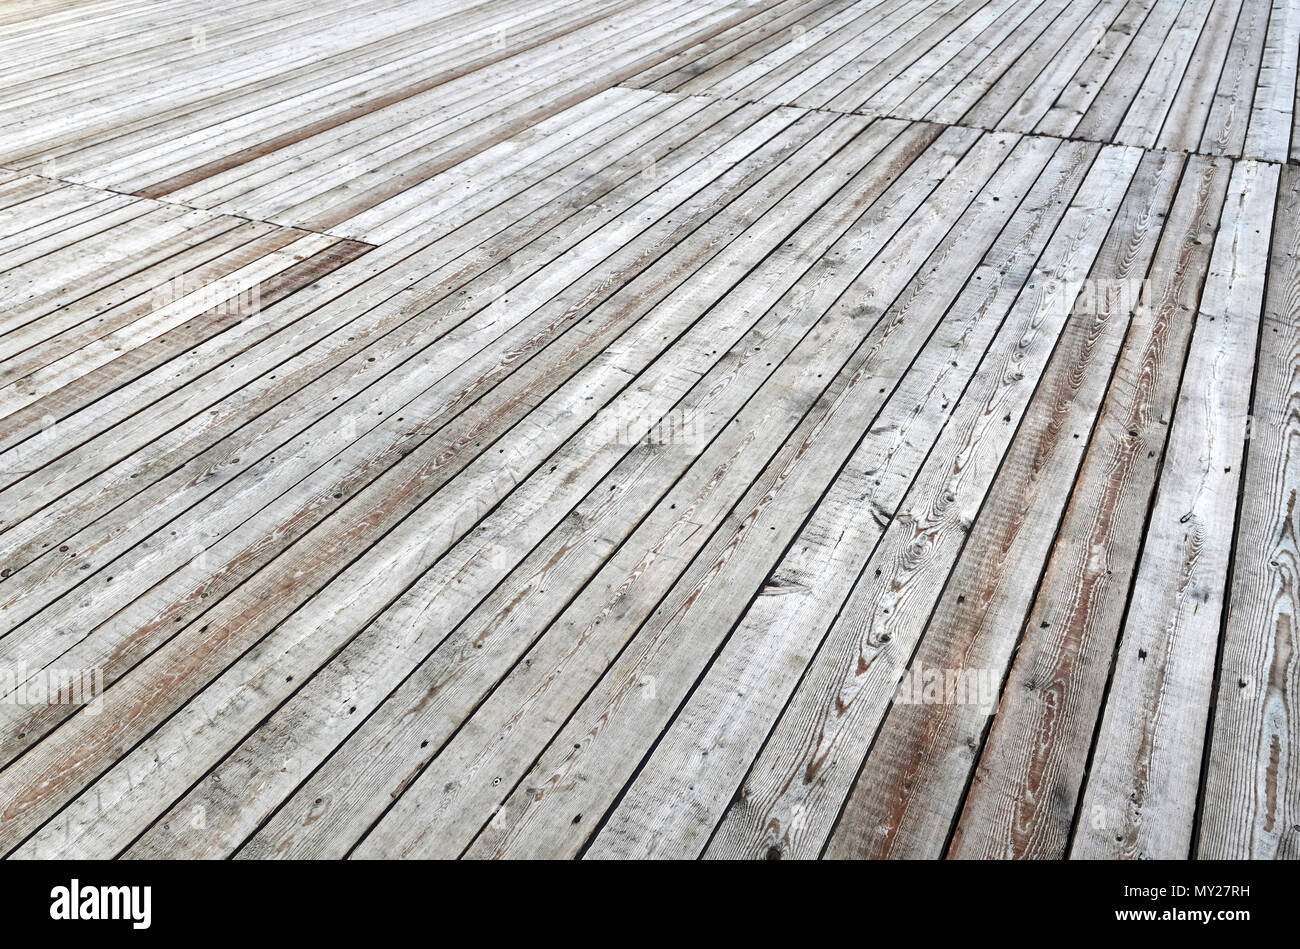 large wooden terrace made with natural planks Stock Photo